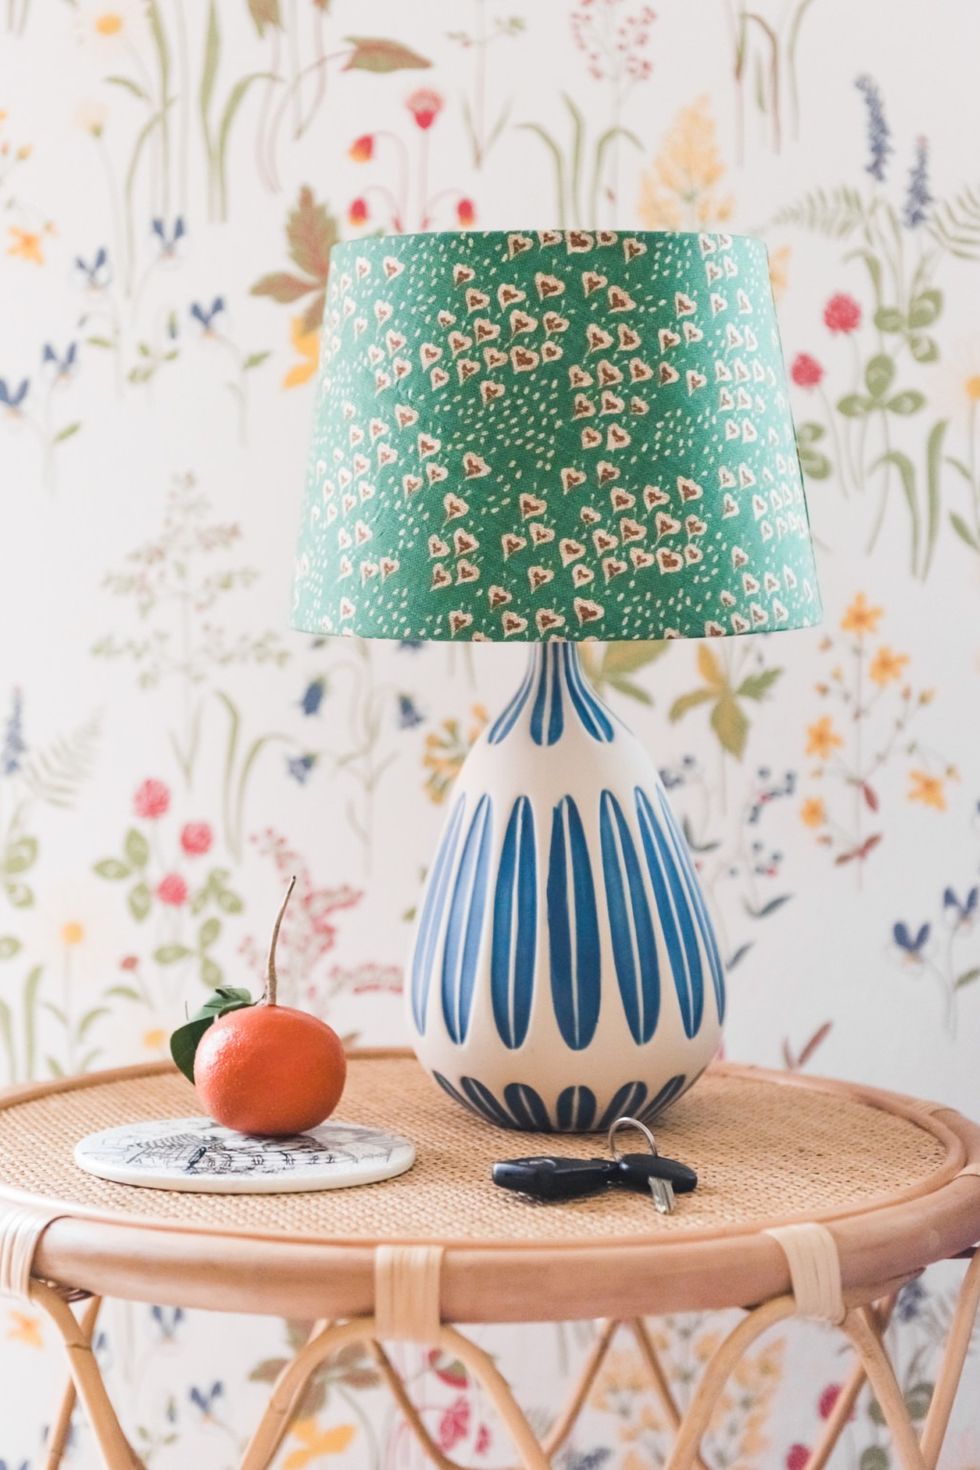 https://hips.hearstapps.com/hmg-prod/images/adult-craft-ideas-diy-fabric-lampshade-6416993132f38.jpeg?crop=0.9947916666666666xw:1xh;center,top&resize=980:*